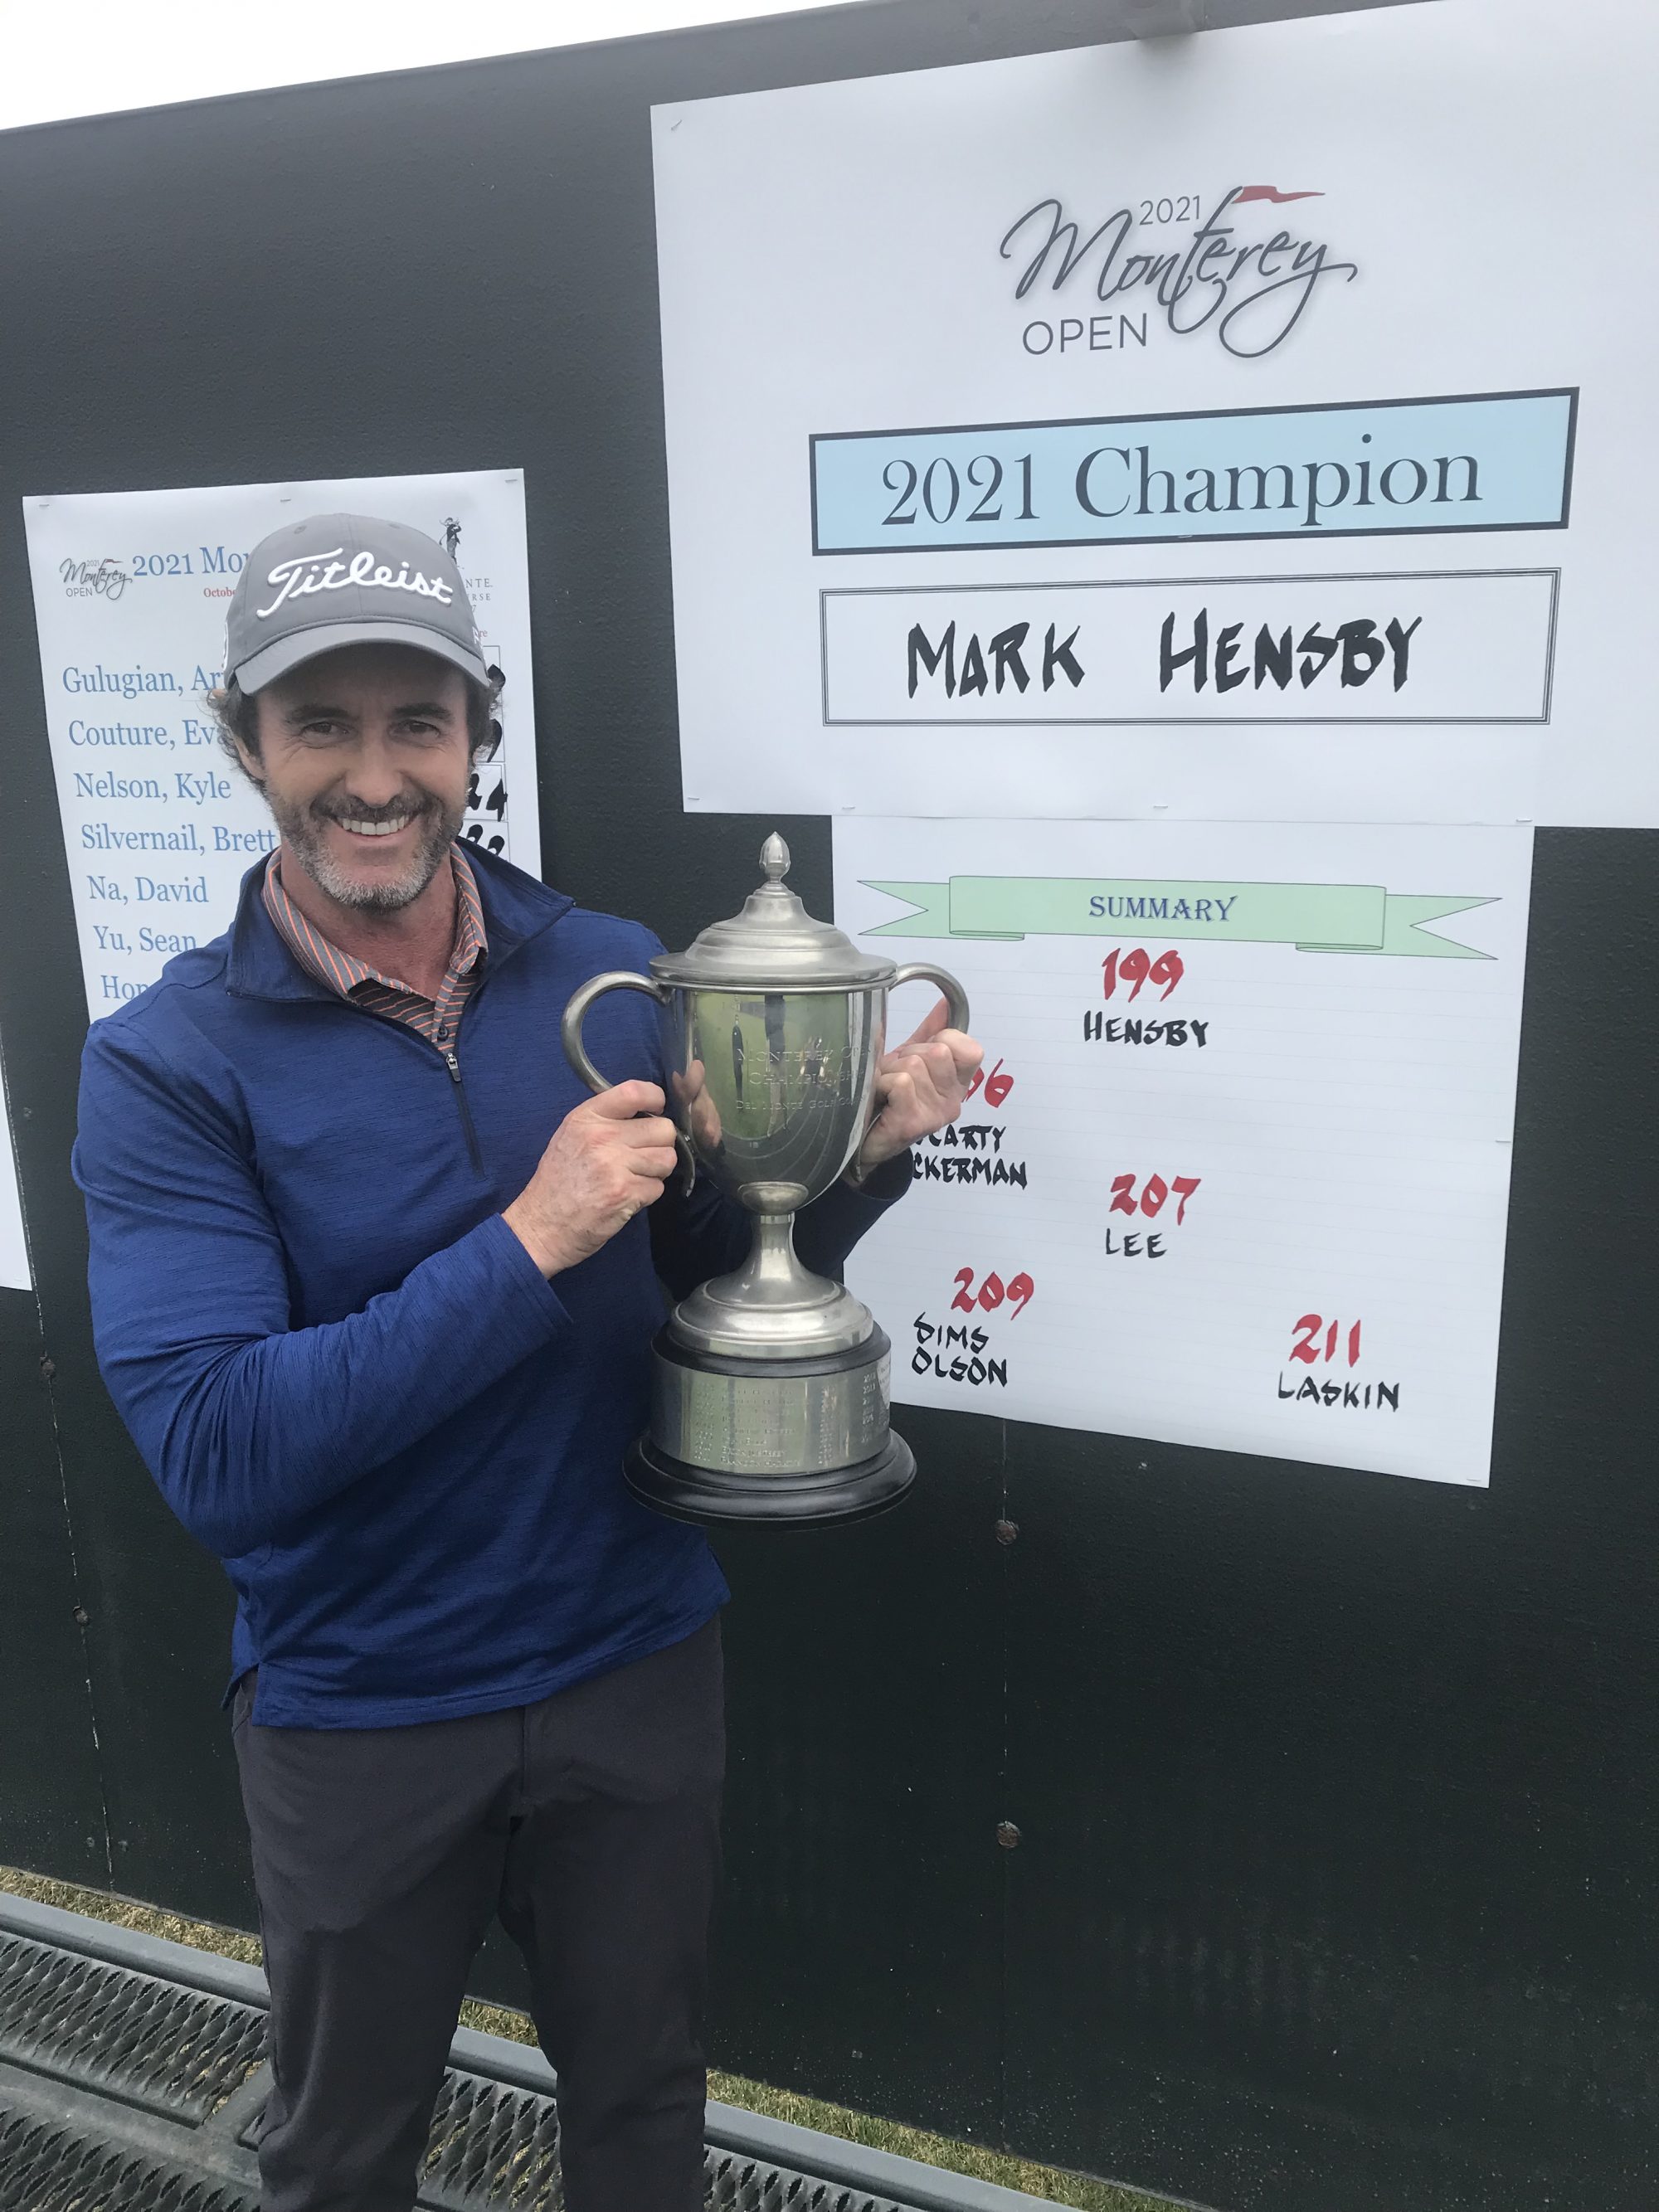 2021 Monterey Open Champion Mark Hensby